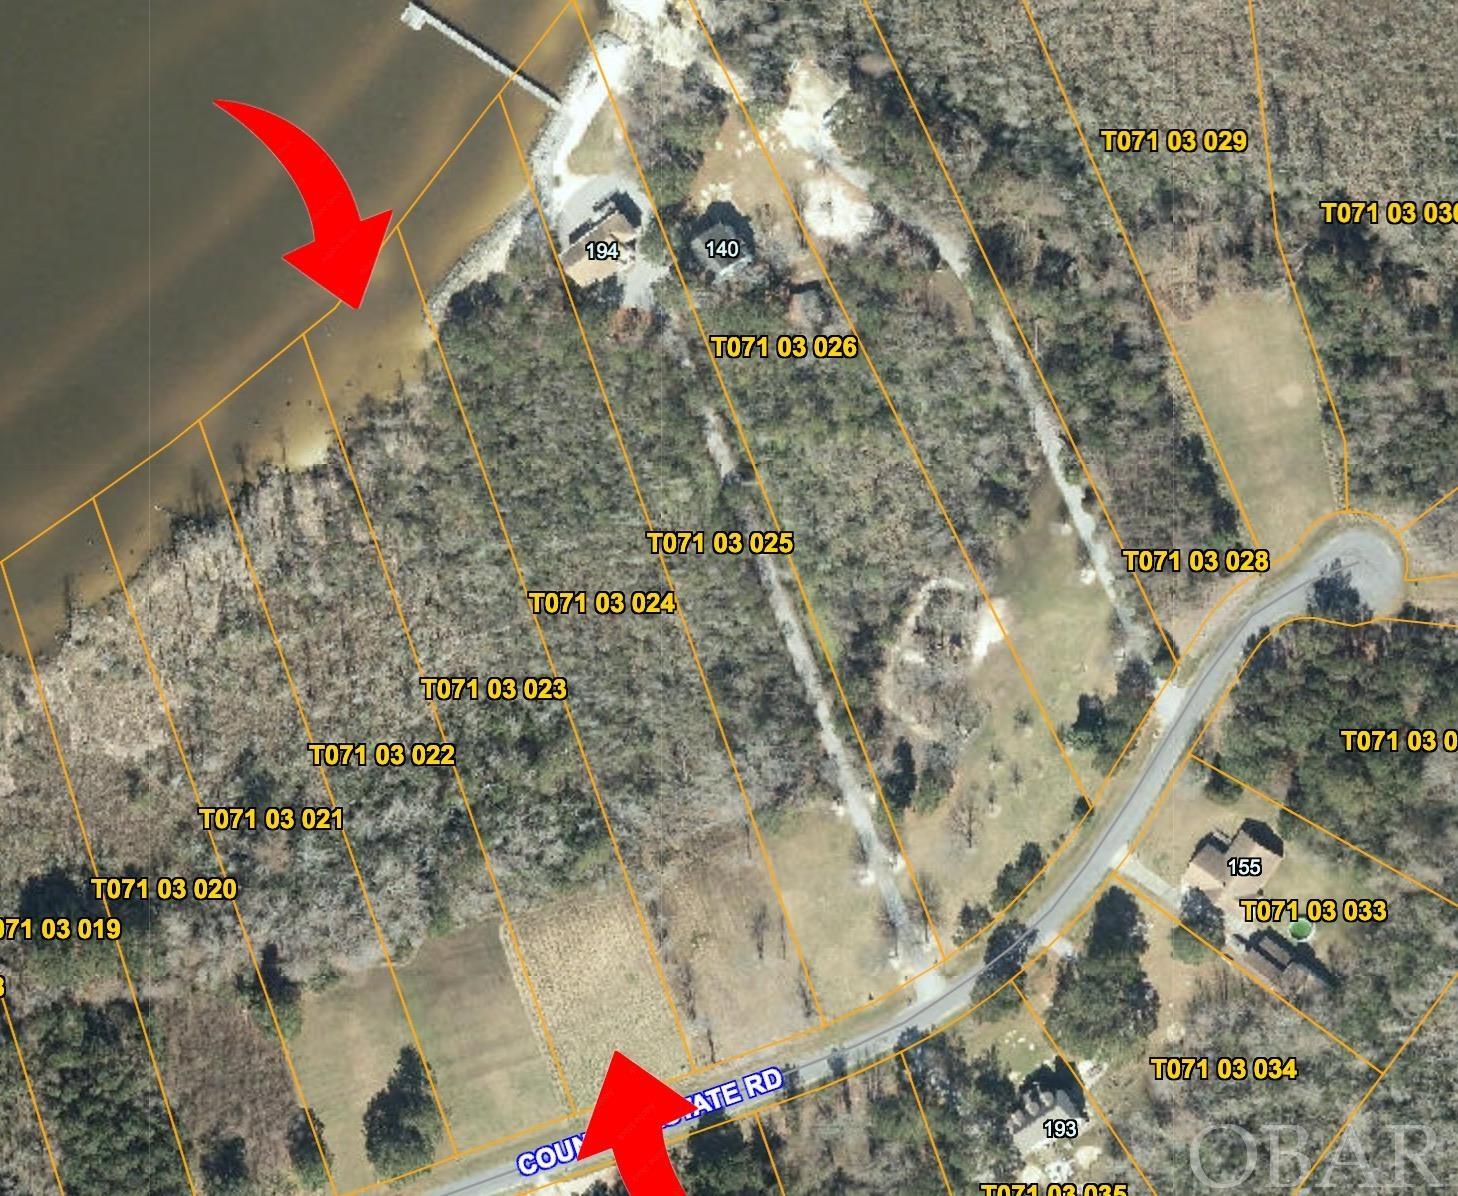 1.56 acre lot, semi cleared, on the Albemarle Sound! Lot is ready to be built upon. County water and utilities are available. Septic approves 3 bedroom house. Possibility for 4 or 5 bedroom with appropriate septic application and survey.  Sound access in the NE corner of the neighborhood is maintained by HOA. Potential for ultra private compound with the addition of gravel road running towards the sound. Magnificent water views and quaint neighborhood. Terrific opportunity to build your eastern NC sound-front dream home at an affordable lot price.